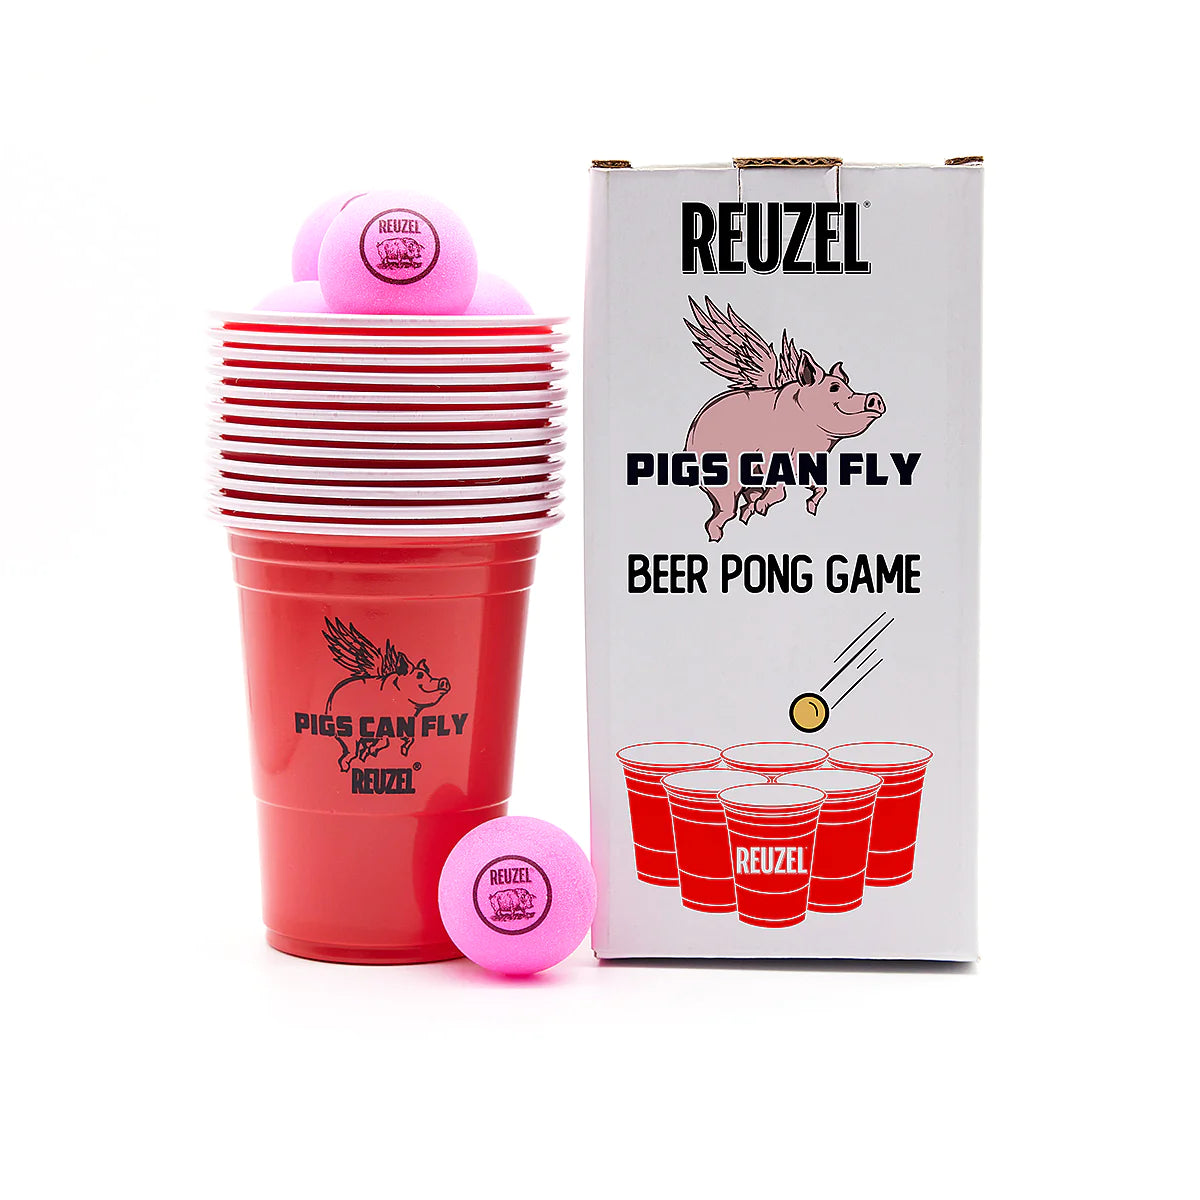 Pigs Can Fly Beer Pong Game